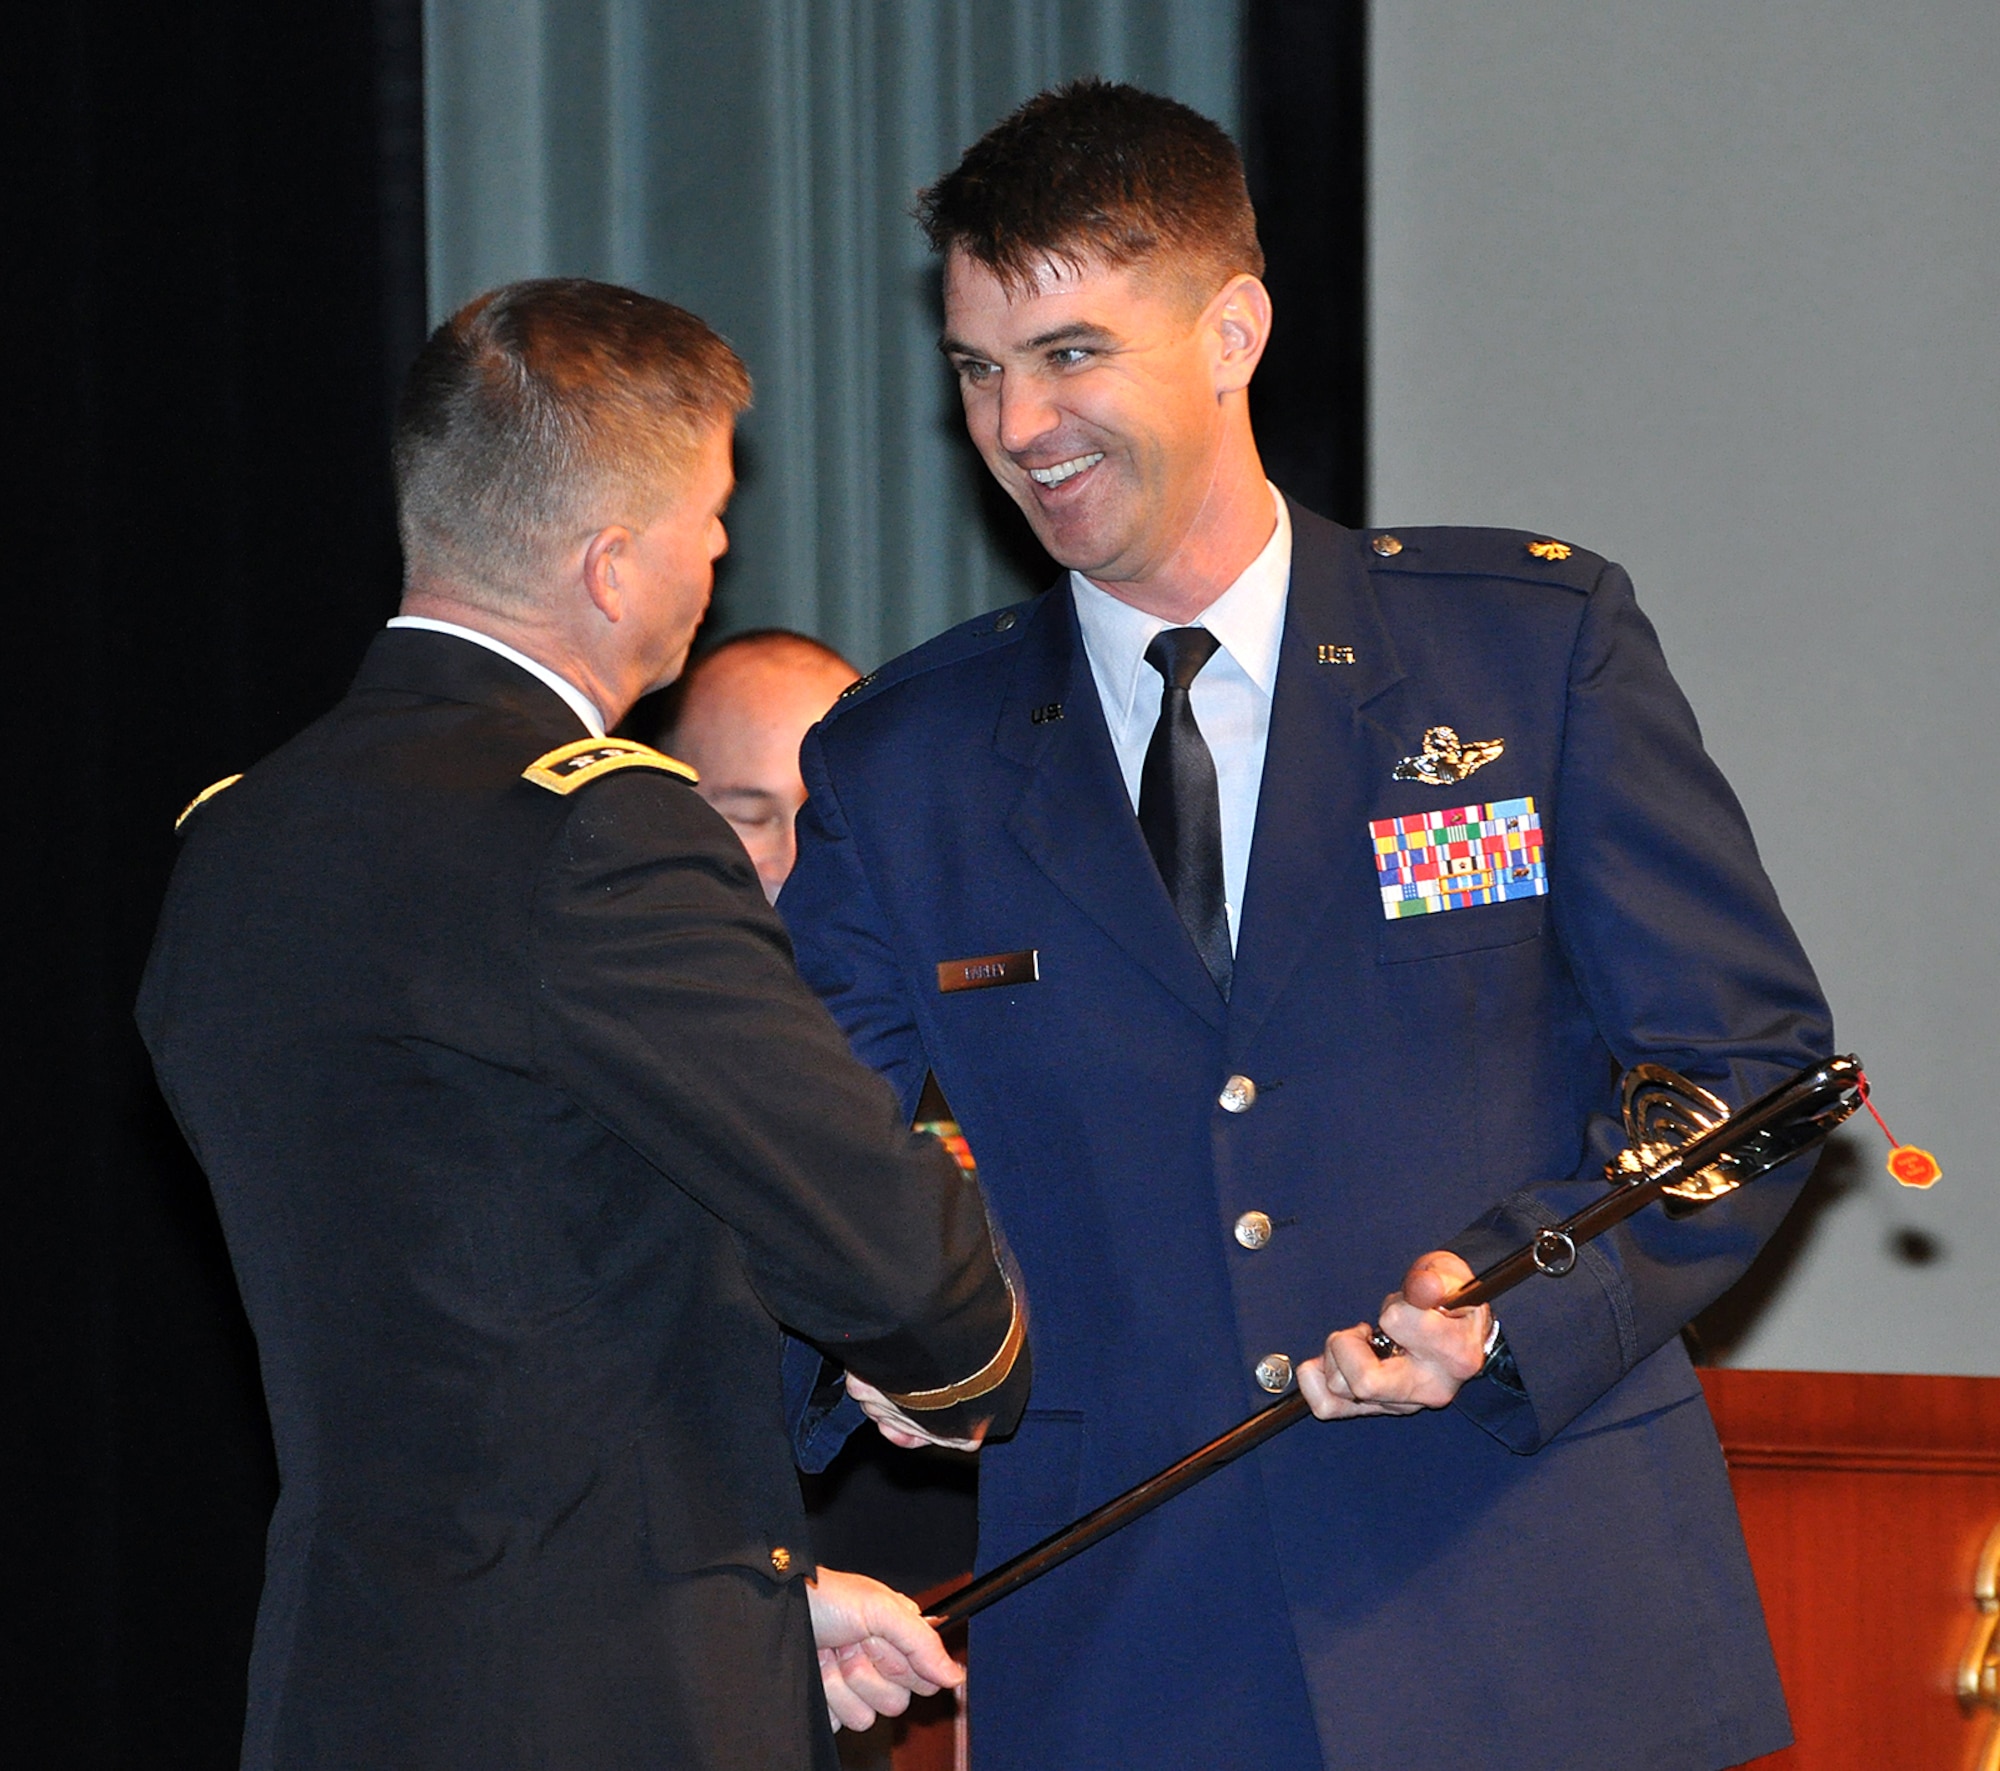 Amry Lt. Gen. David Perkins congratulates Maj. Jason Earley as he is recognized for receiving several Command and General Staff College awards Dec. 13, 2013 during graduation for the 2013-02 Command and General Staff Officer Course at the Lewis and Clark Center at Fort Leavenworth, Kan. Earley was recognized as the class's top U.S. graduate with the General George C. Marshall Award, as the Distinguished Master Tactician with the General George S. Patton Jr. Master Tactician Award, and as the student who best exemplifies the highest qualities of a member of the profession of arms with the Arter-Doniphan Award. Perkins is the Command and General Staff College Commandant and Combined Arms Center and the Fort Leavenworth Commander. (Photo by Prudence Siebert/Fort Leavenworth Lamp)